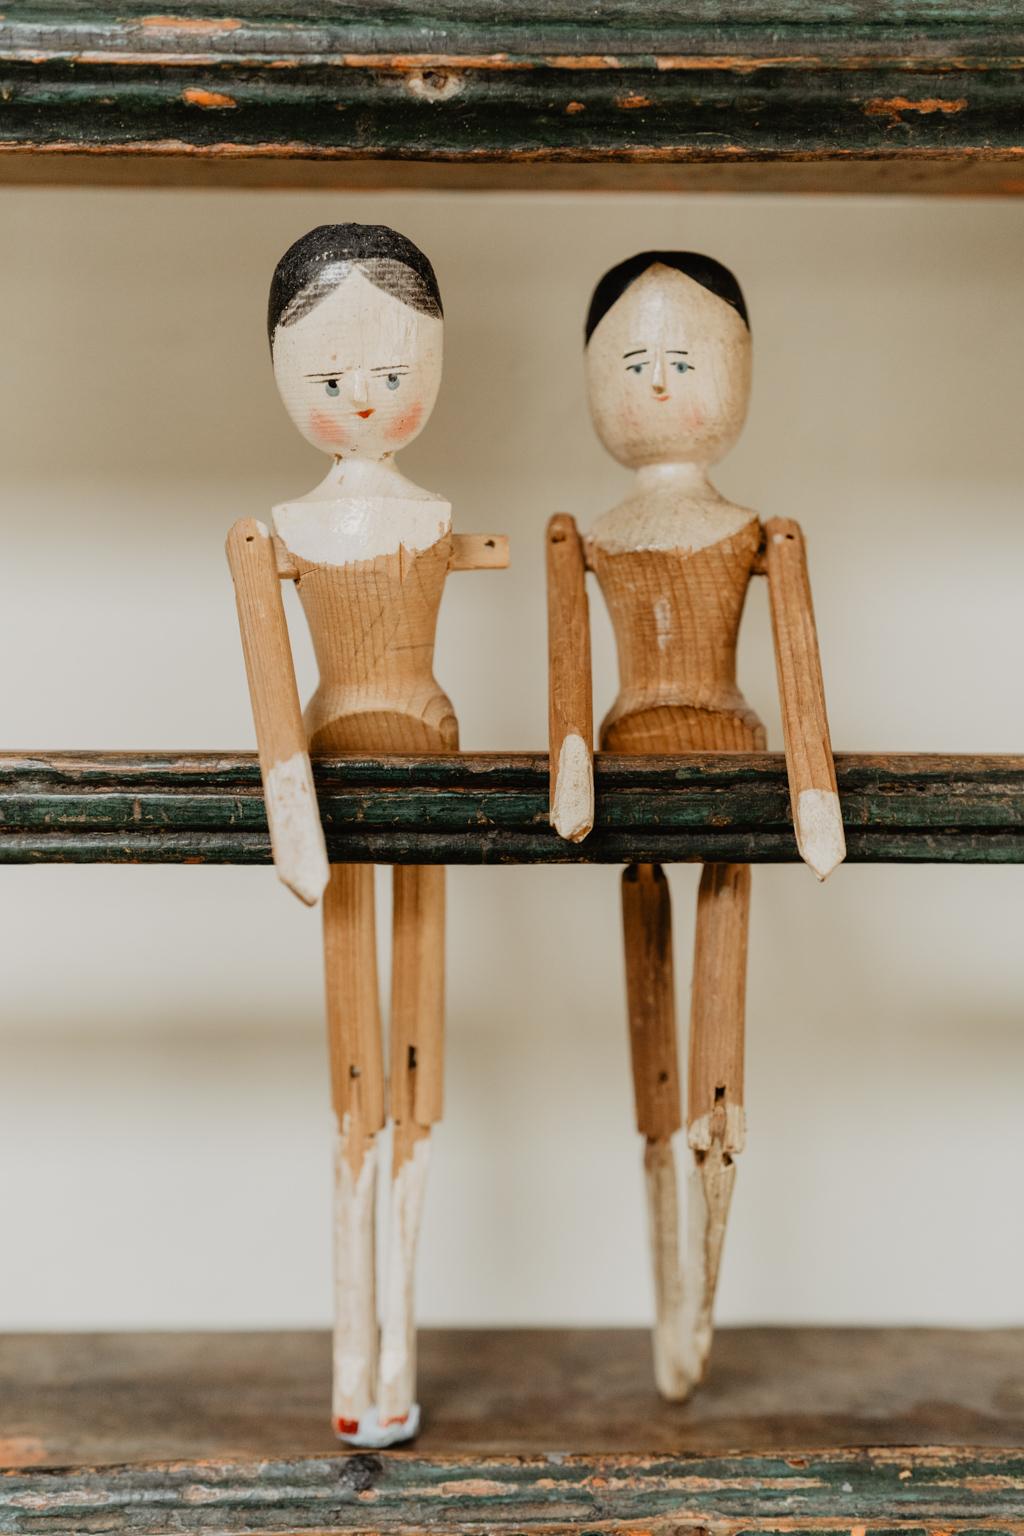 A great collection of 12 wooden peg dolls. Collector’s item from England,
made from the early 20th century till mid-20th century.
Dimensions 23, 24, 25, 30 and 31 cm, 3 very tiny ones 5 cm.